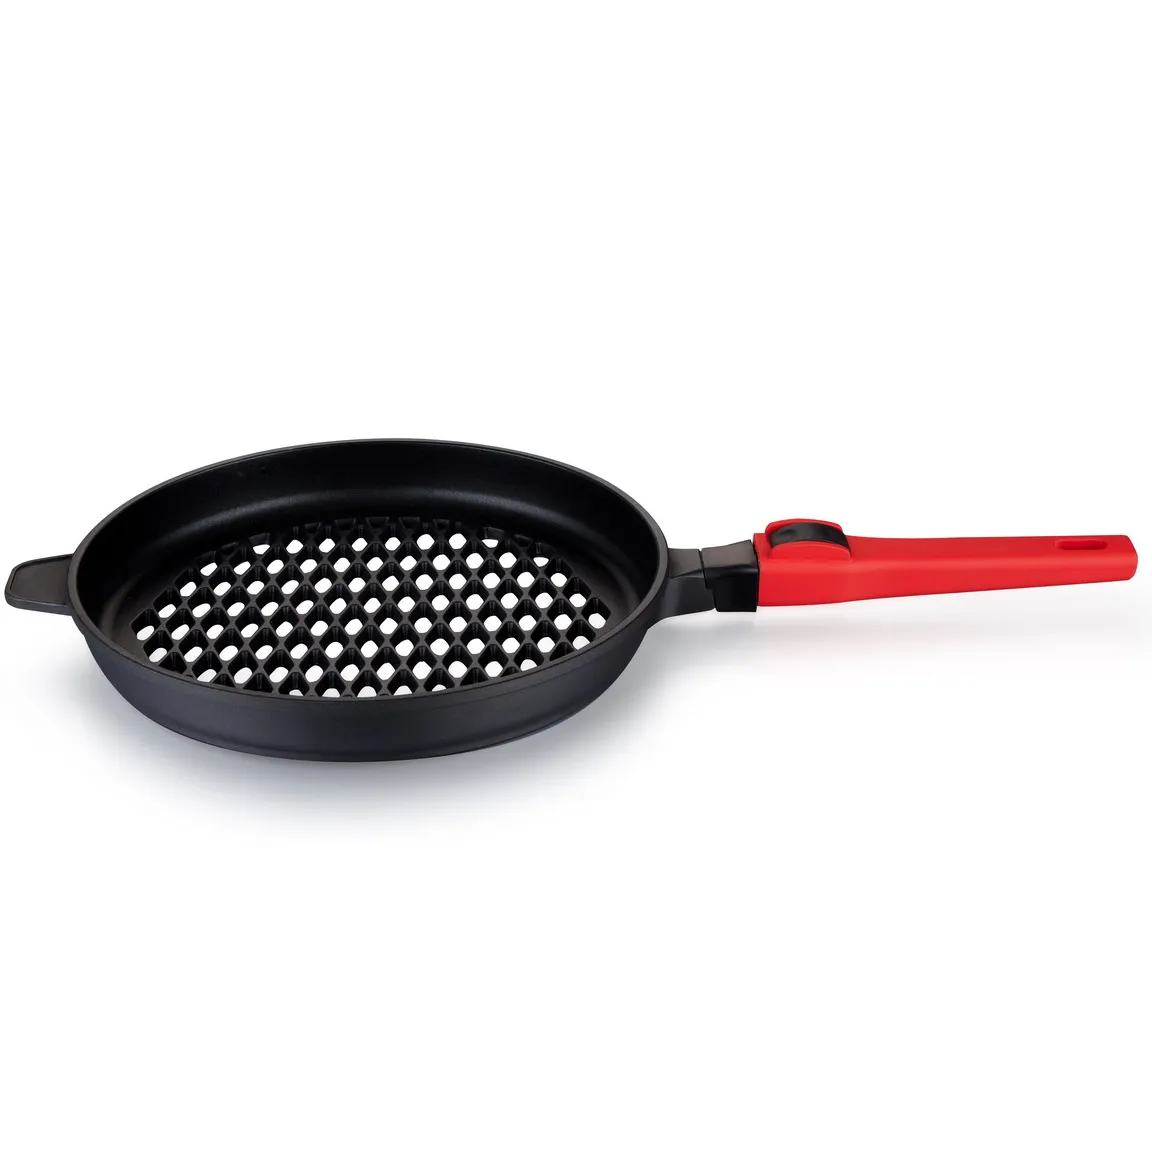 New design cooking grill pan griddle frying pan with detachable handle